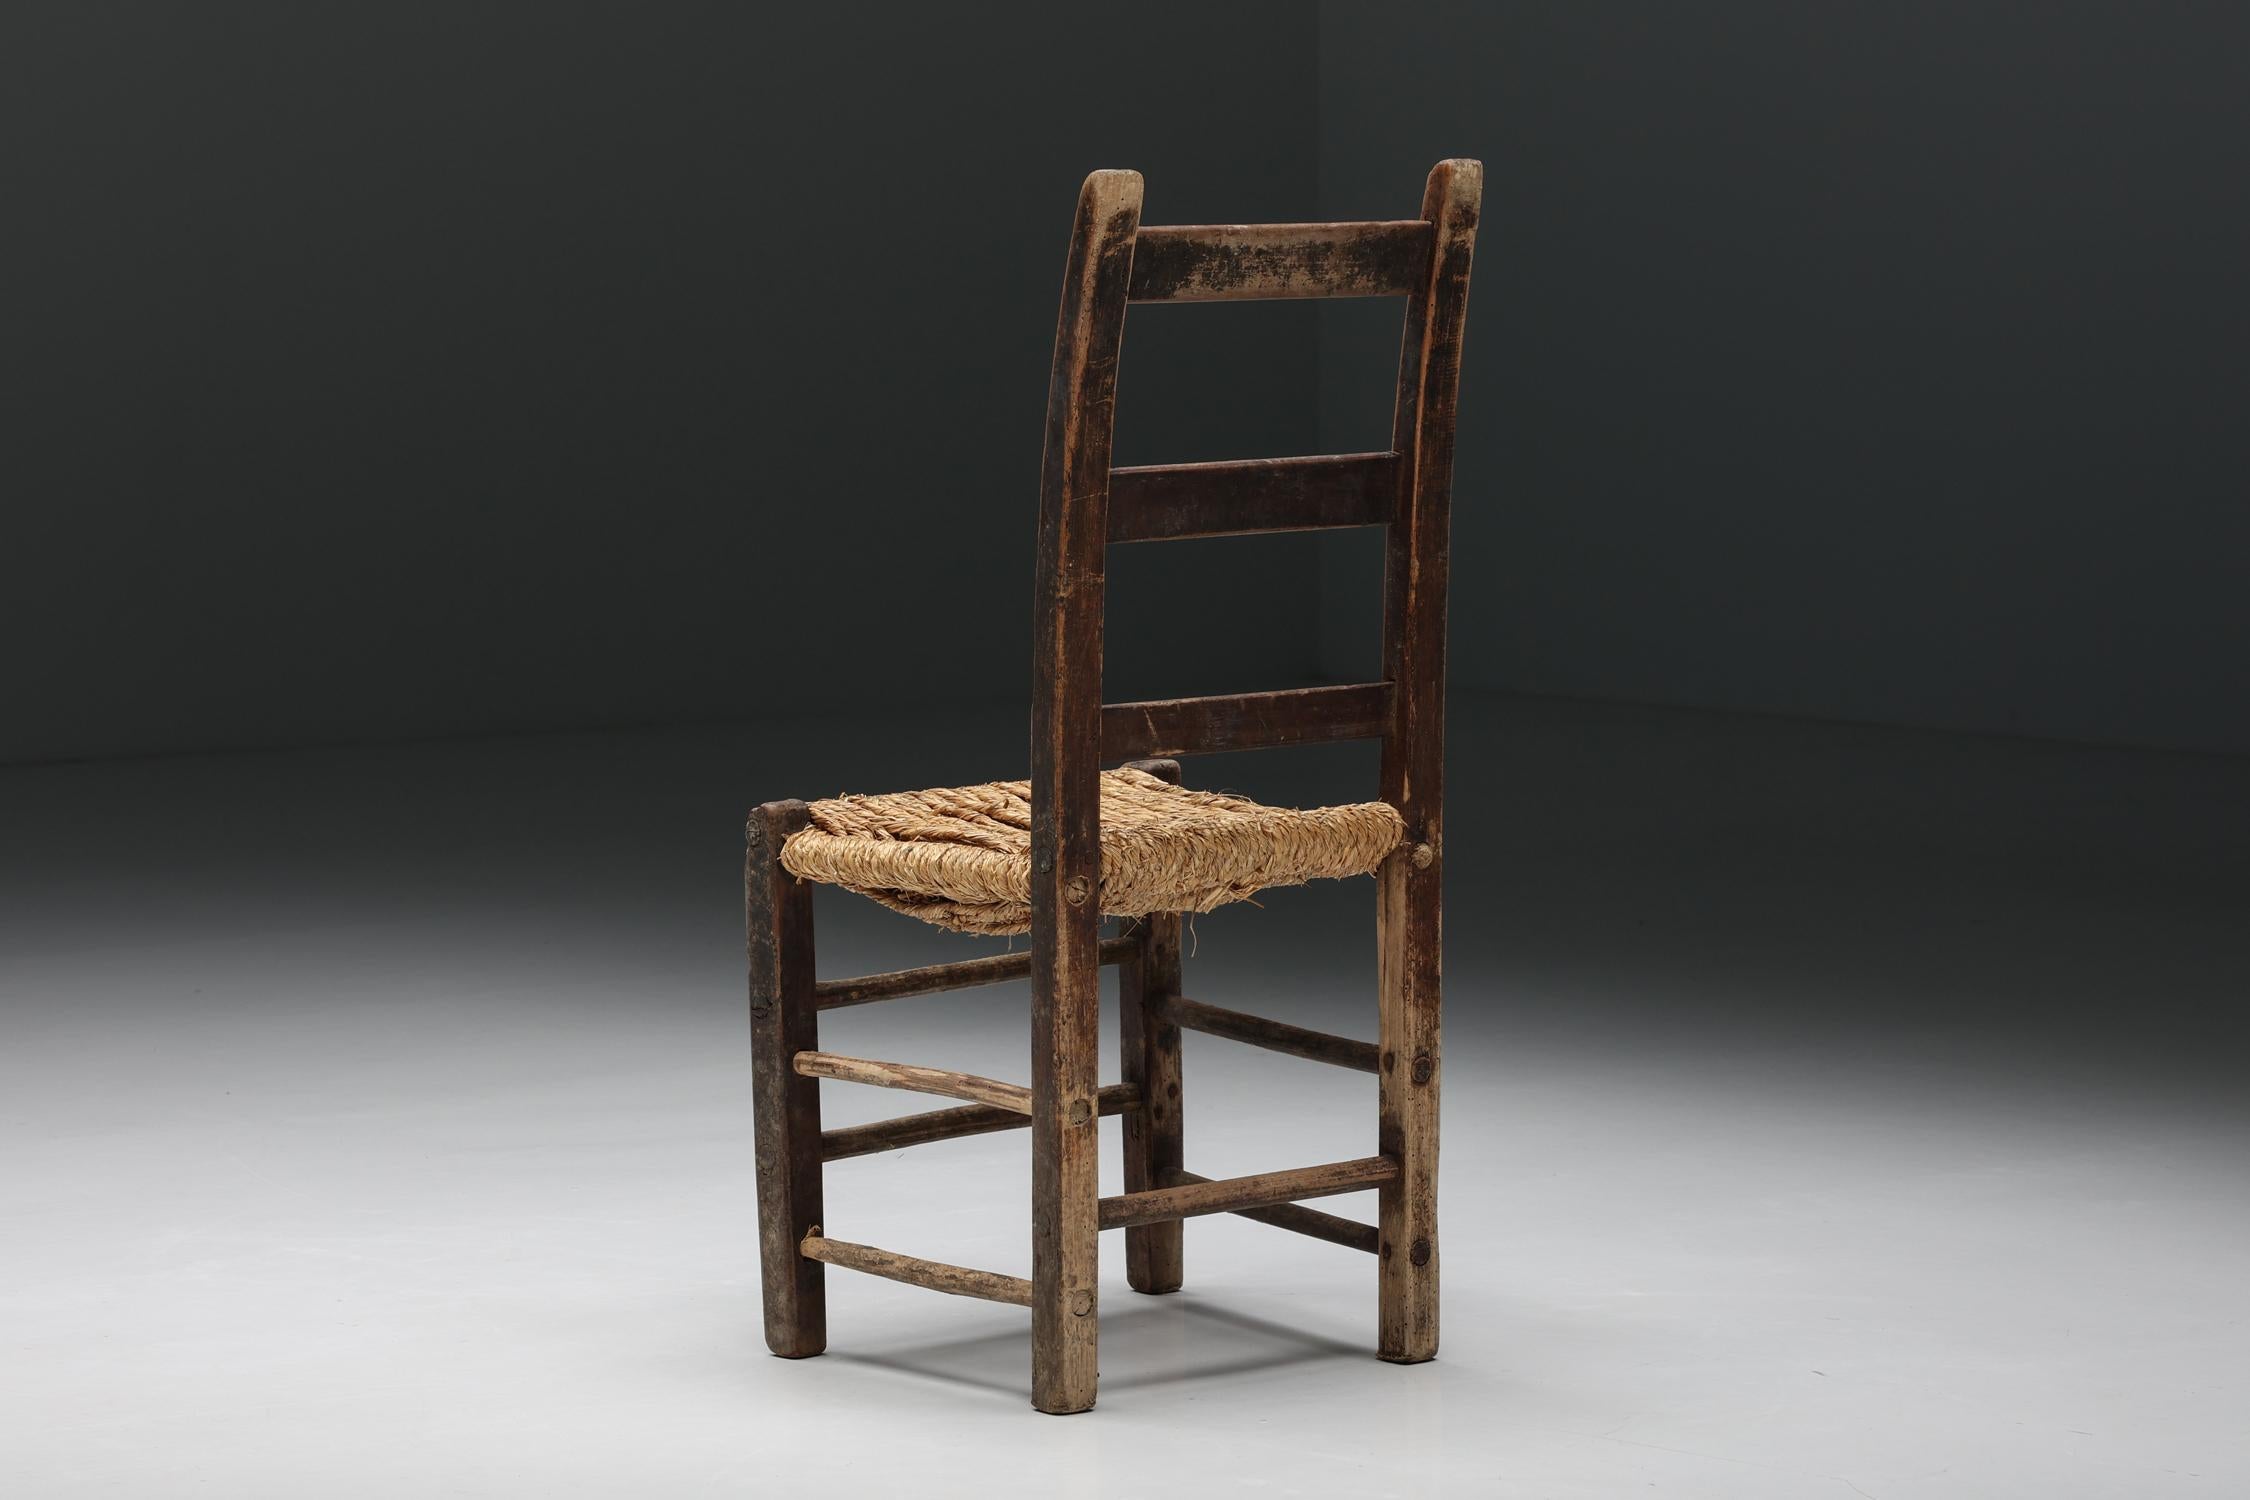 French Rustic Wabi Sabi Rattan Chair, France, 1940s For Sale